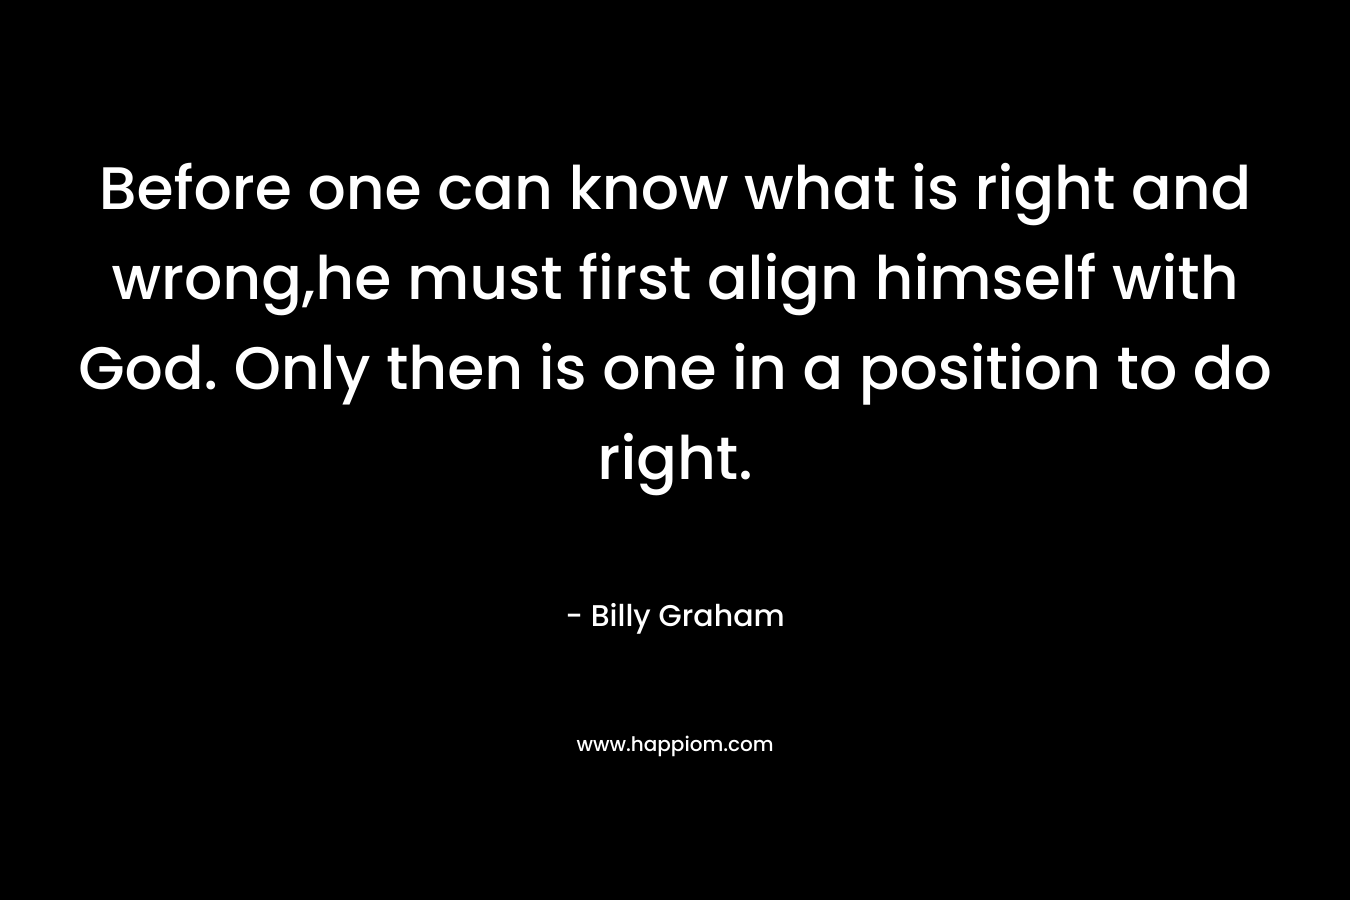 Before one can know what is right and wrong,he must first align himself with God. Only then is one in a position to do right. – Billy Graham